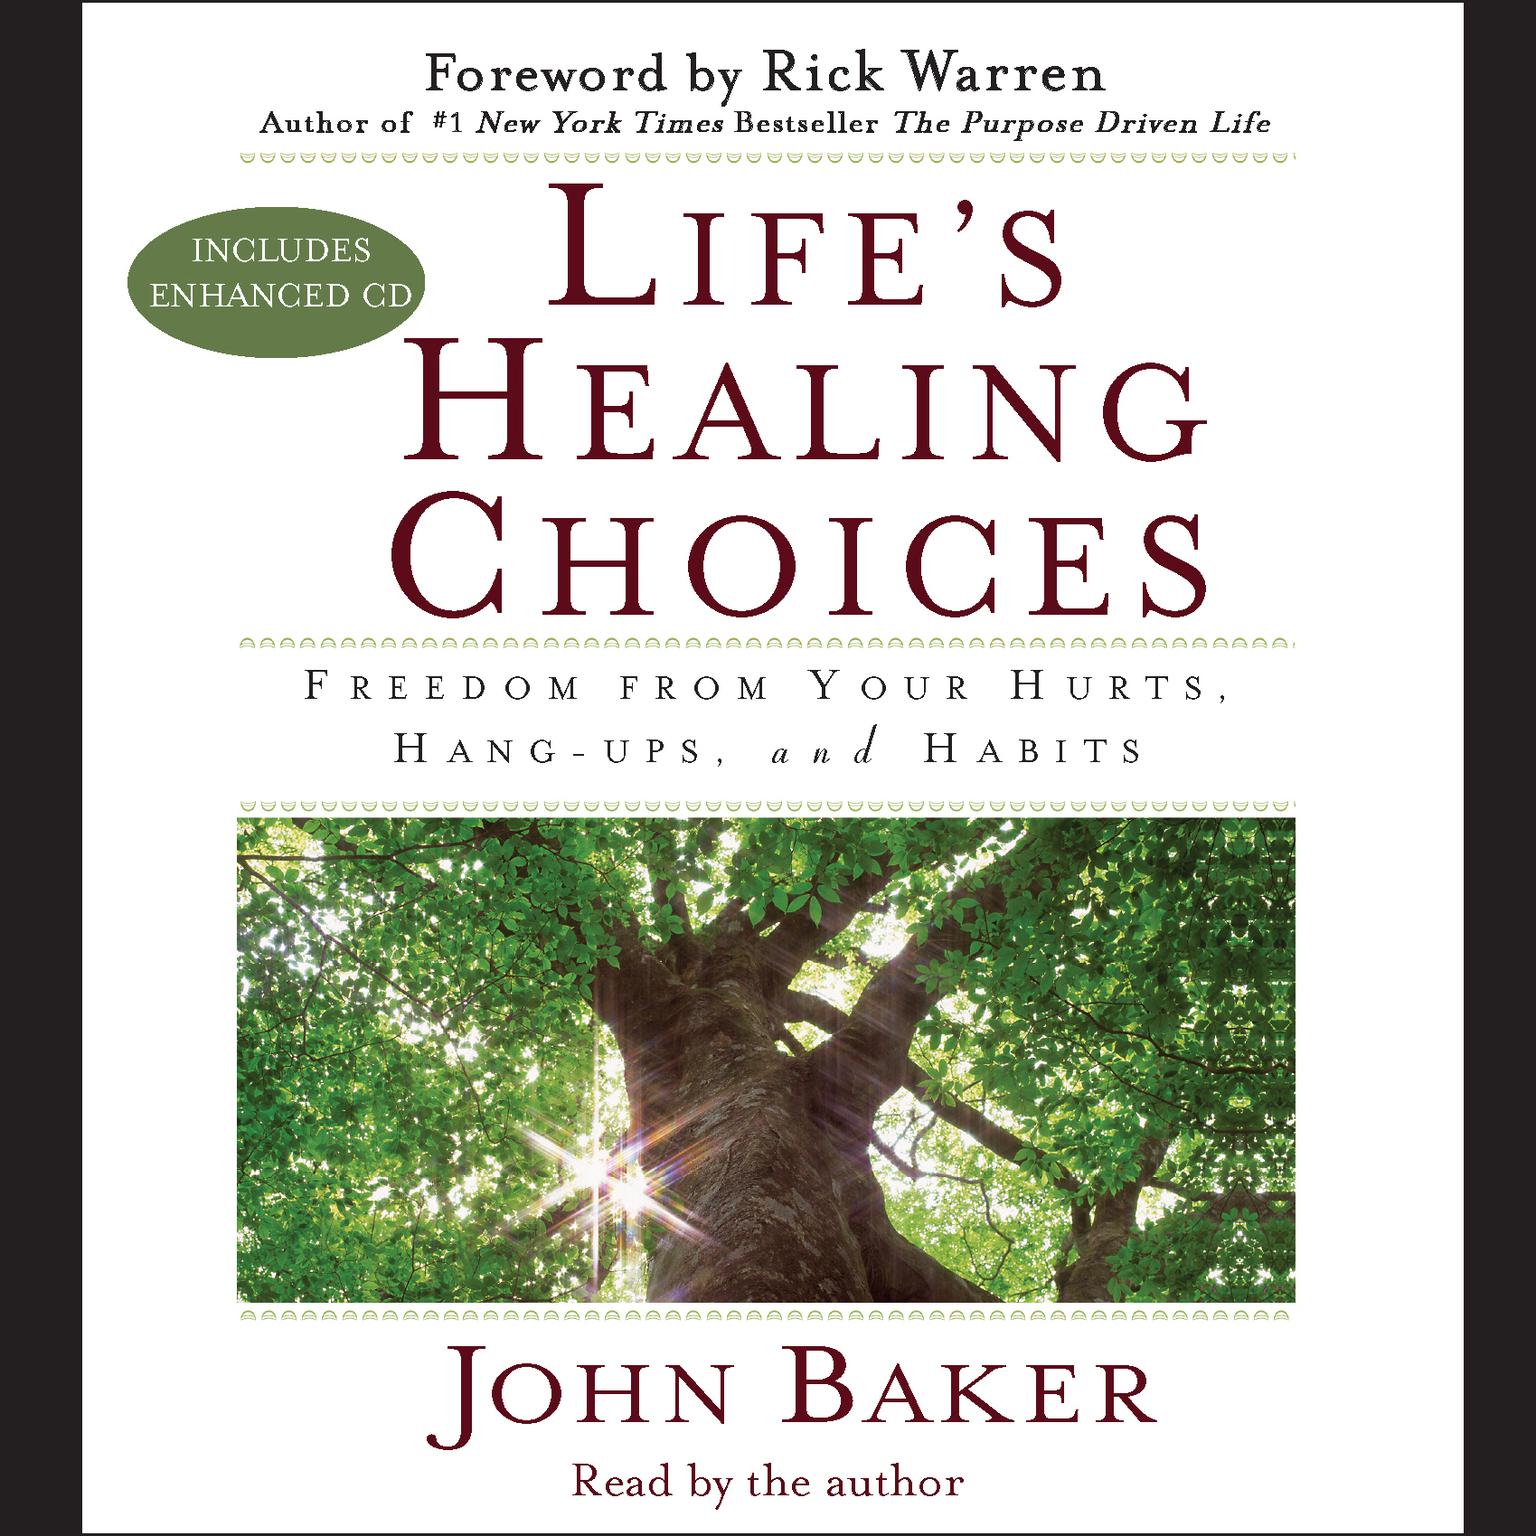 Lifes Healing Choices (Abridged): Freedom from Your Hurts, Hang-ups, and Habits Audiobook, by John Baker